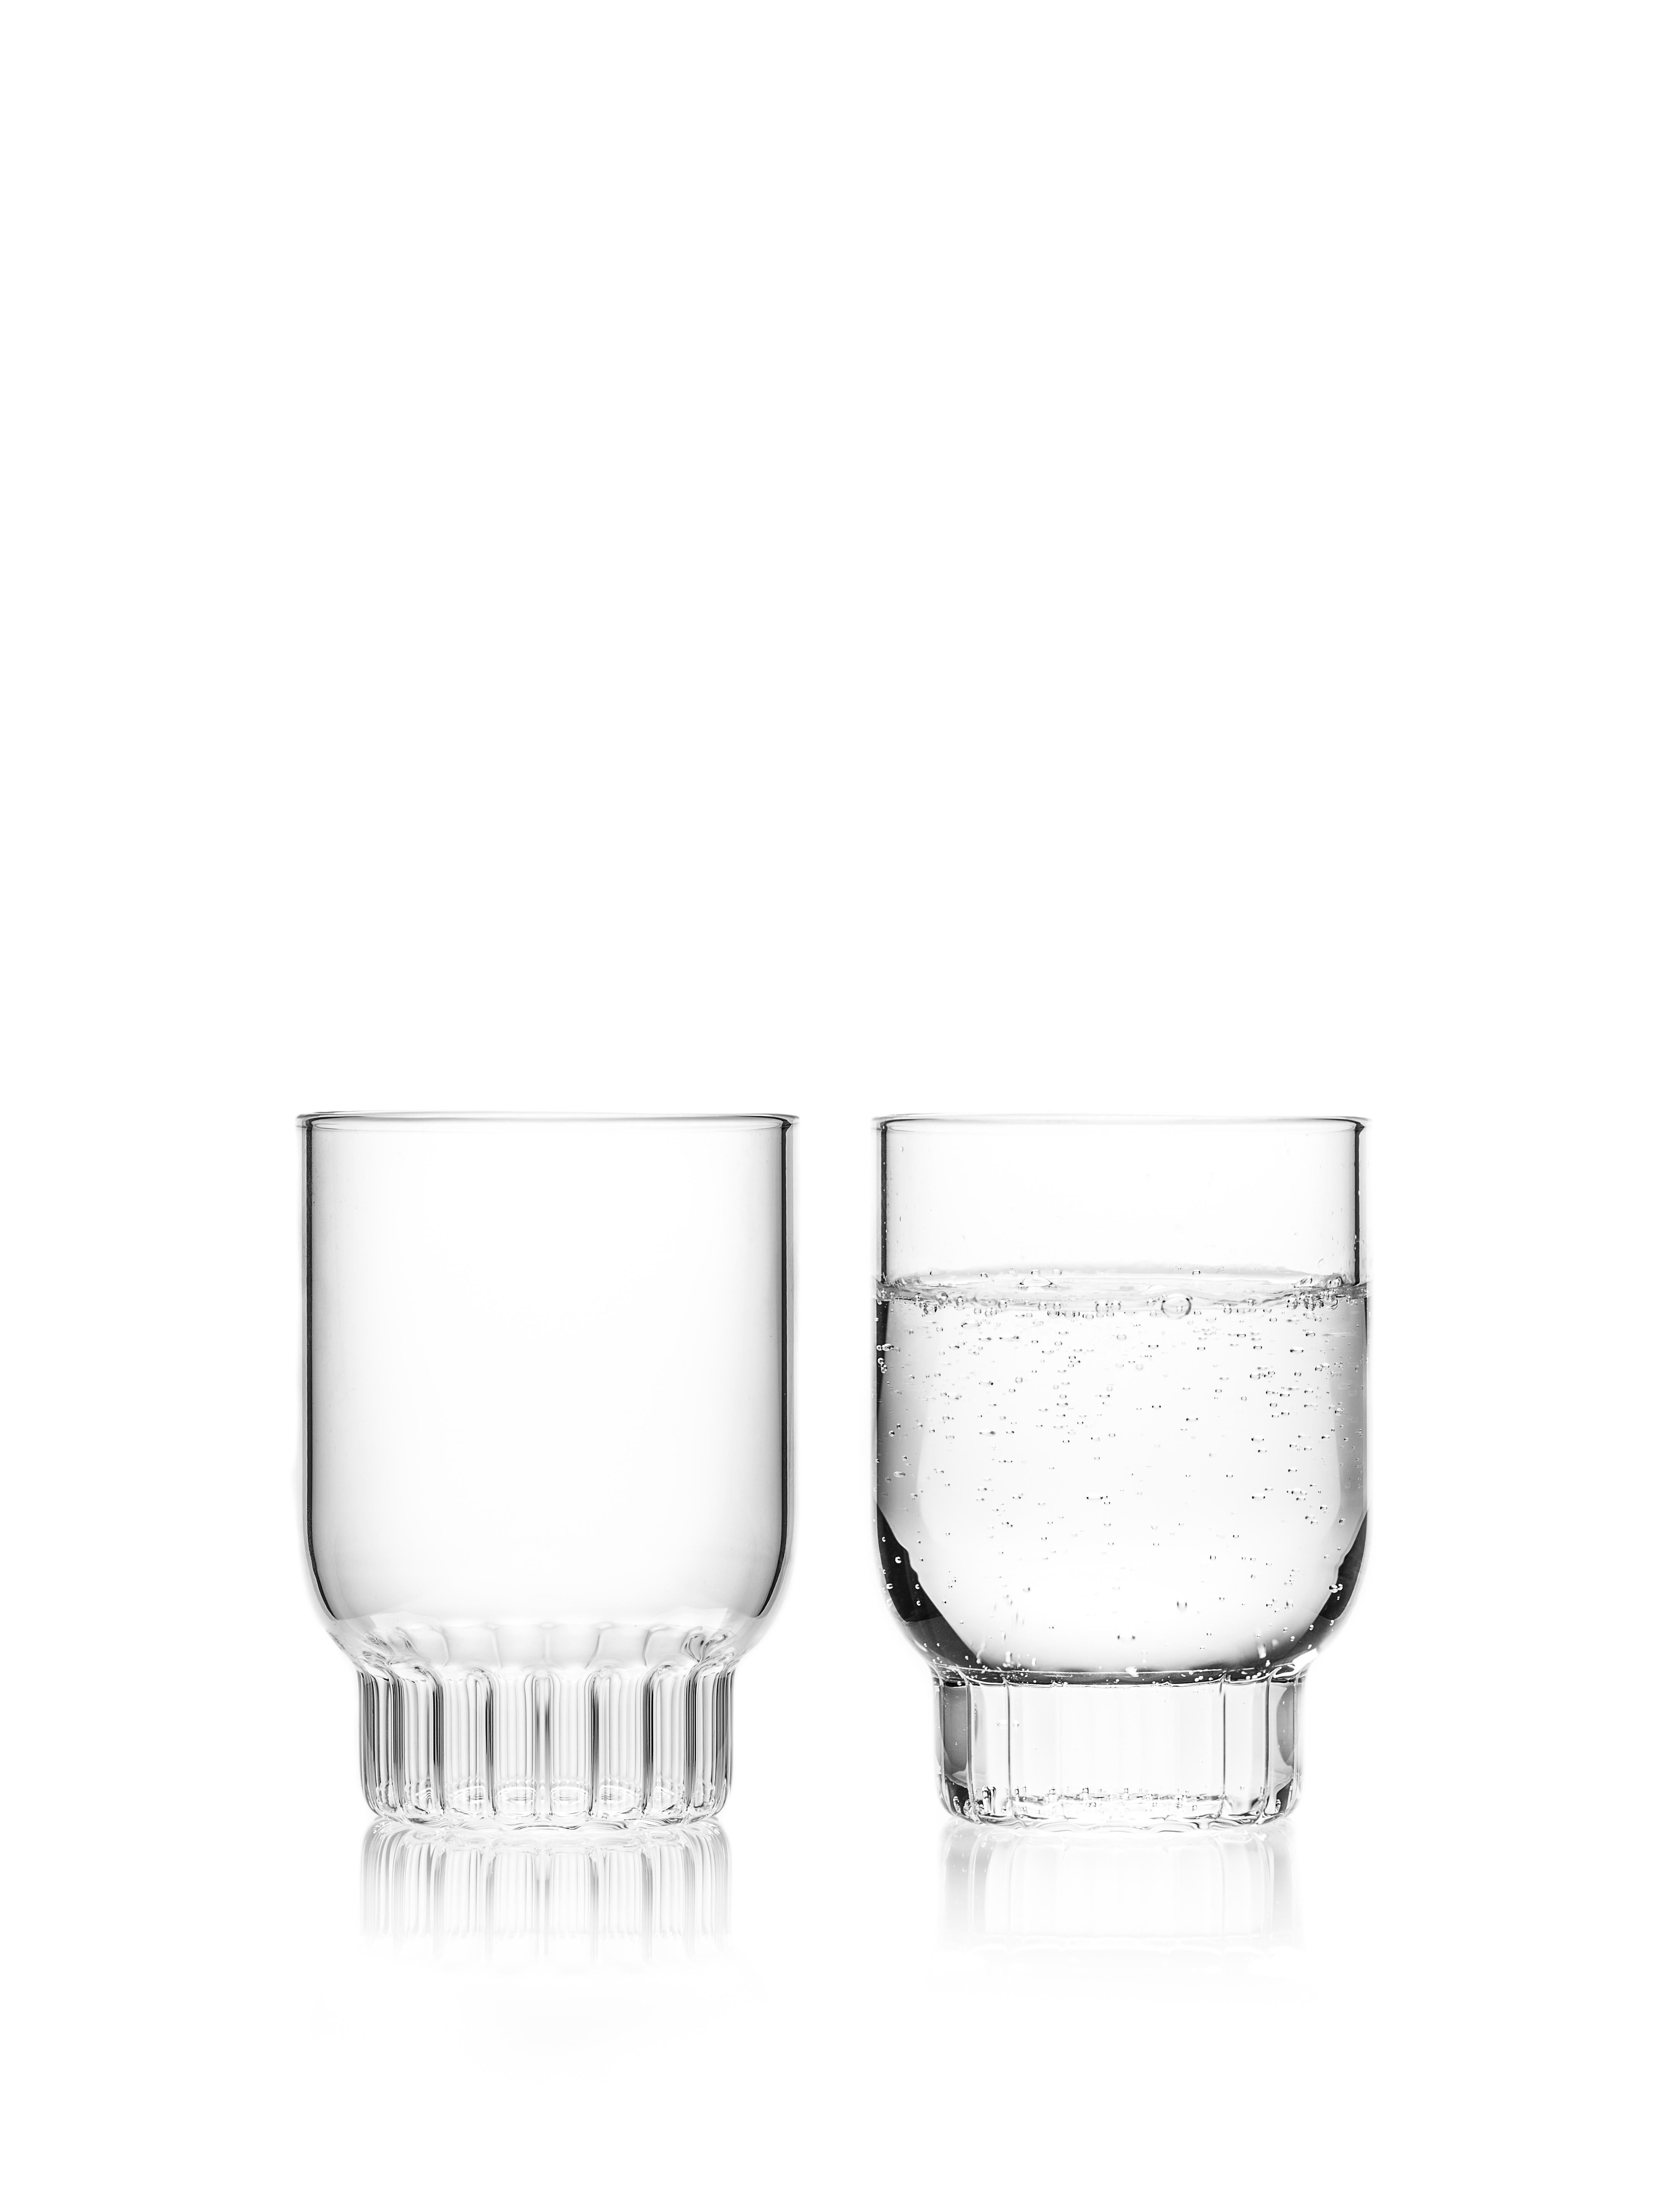 Rasori medium glasses, set of two.

As the designer's favorite street in Milan, her home away from home, the clear Czech contemporary Rasori Medium glasses are a playful and delicate combination of materials and form, just like the city itself. A